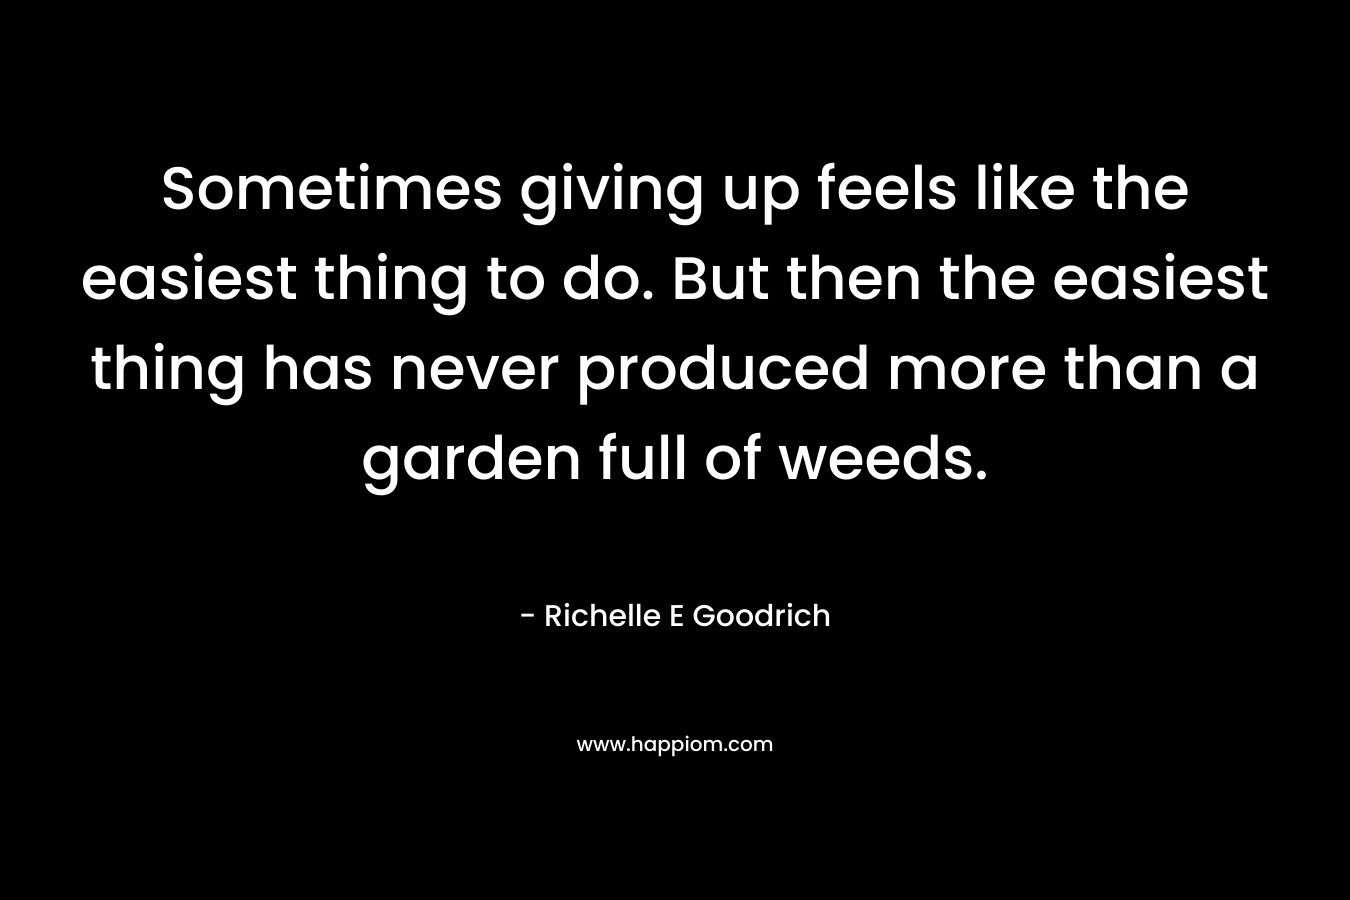 Sometimes giving up feels like the easiest thing to do. But then the easiest thing has never produced more than a garden full of weeds. – Richelle E Goodrich